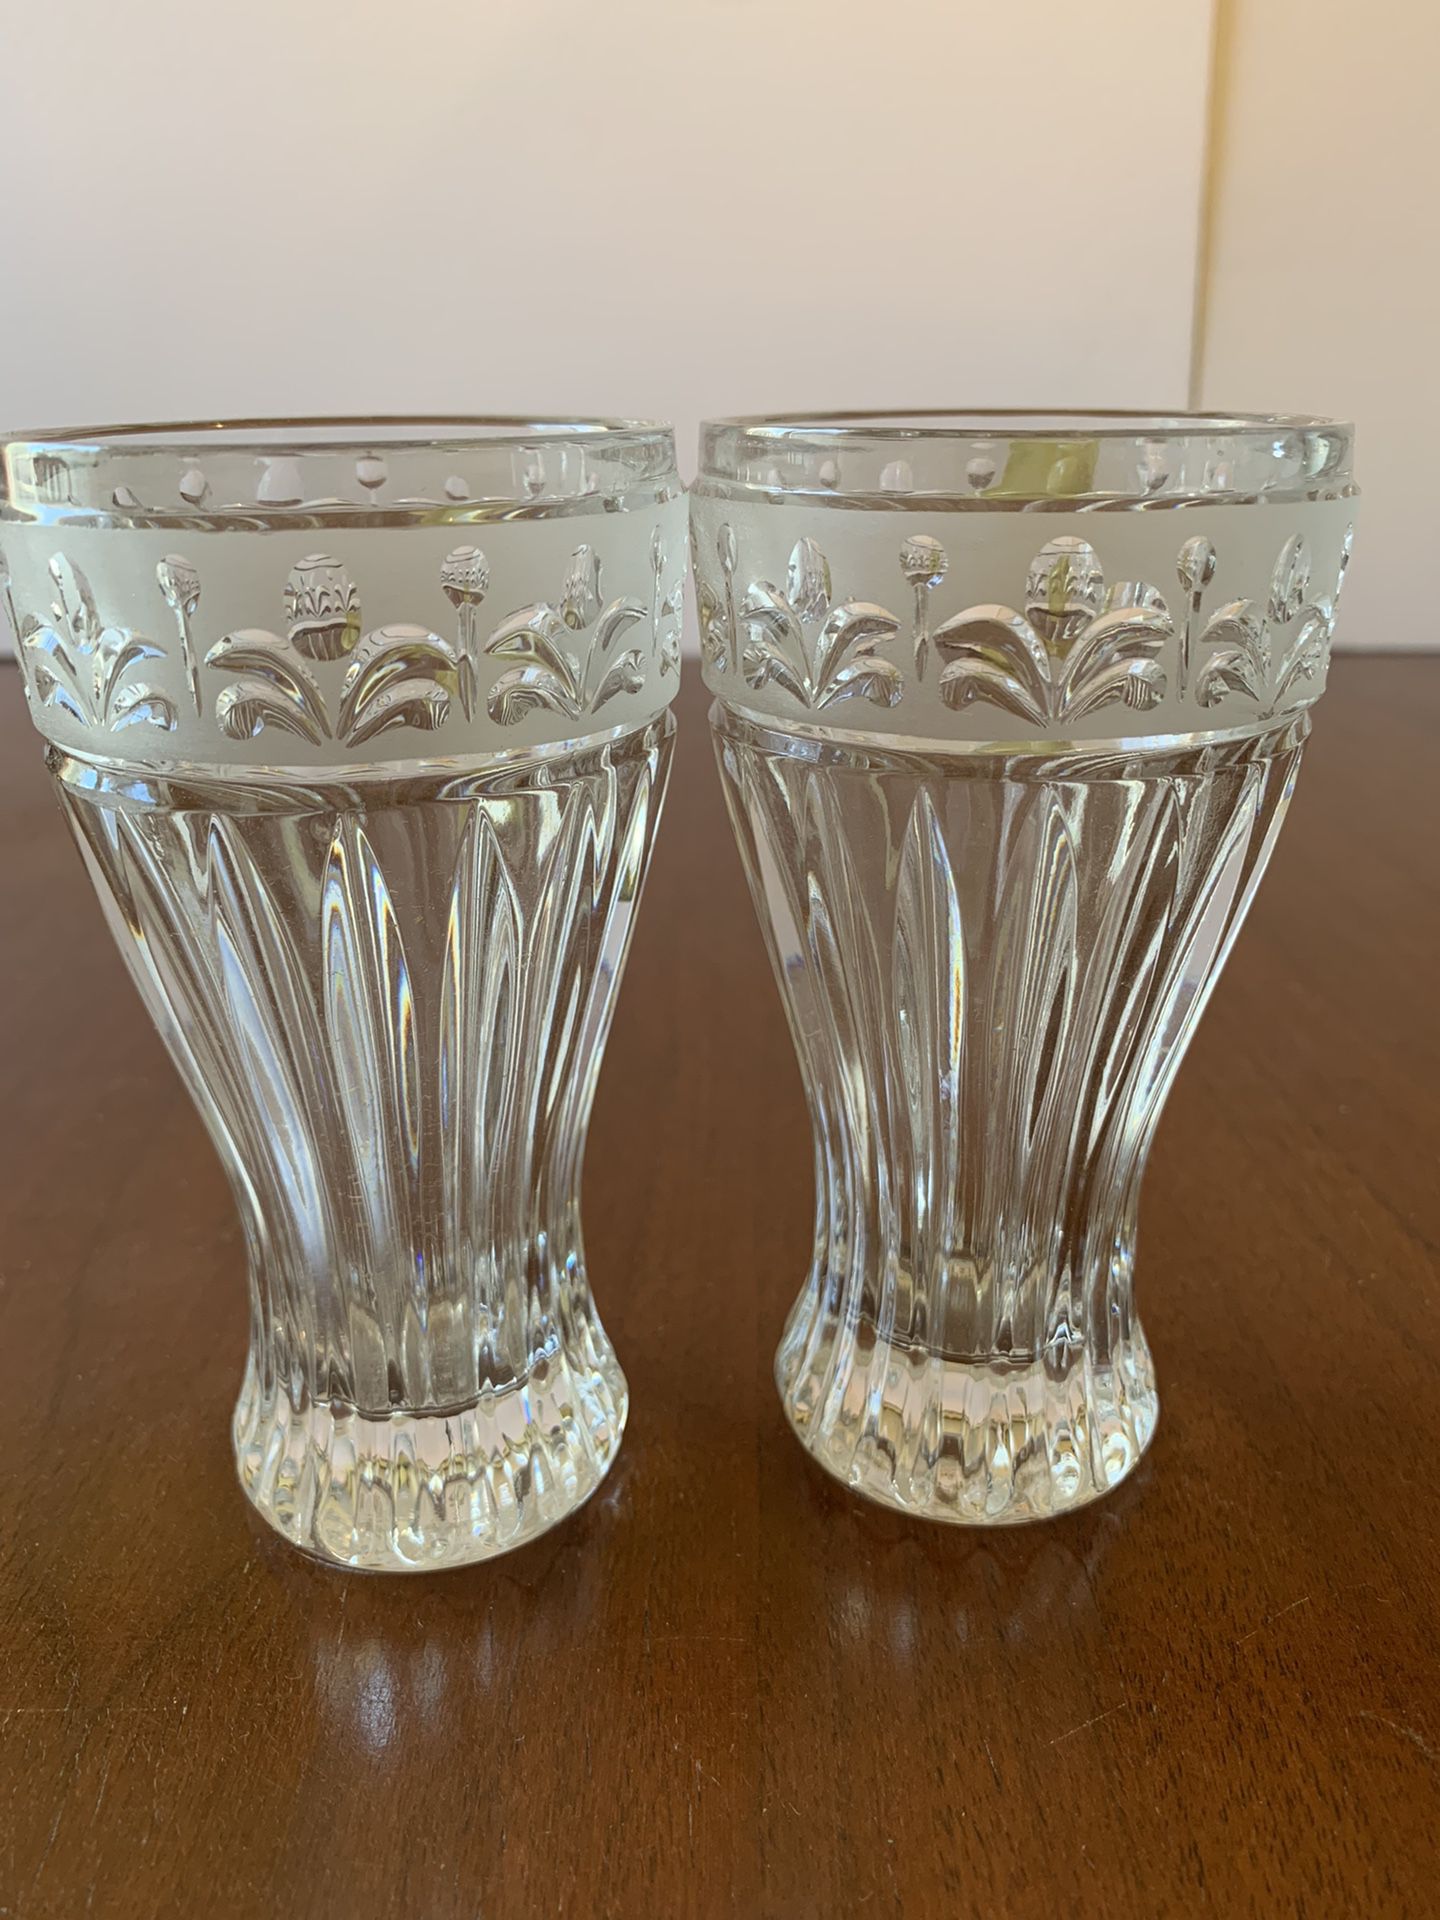 Anna Butte Bleikristall 24% Lead Crystal Glasses  - 2